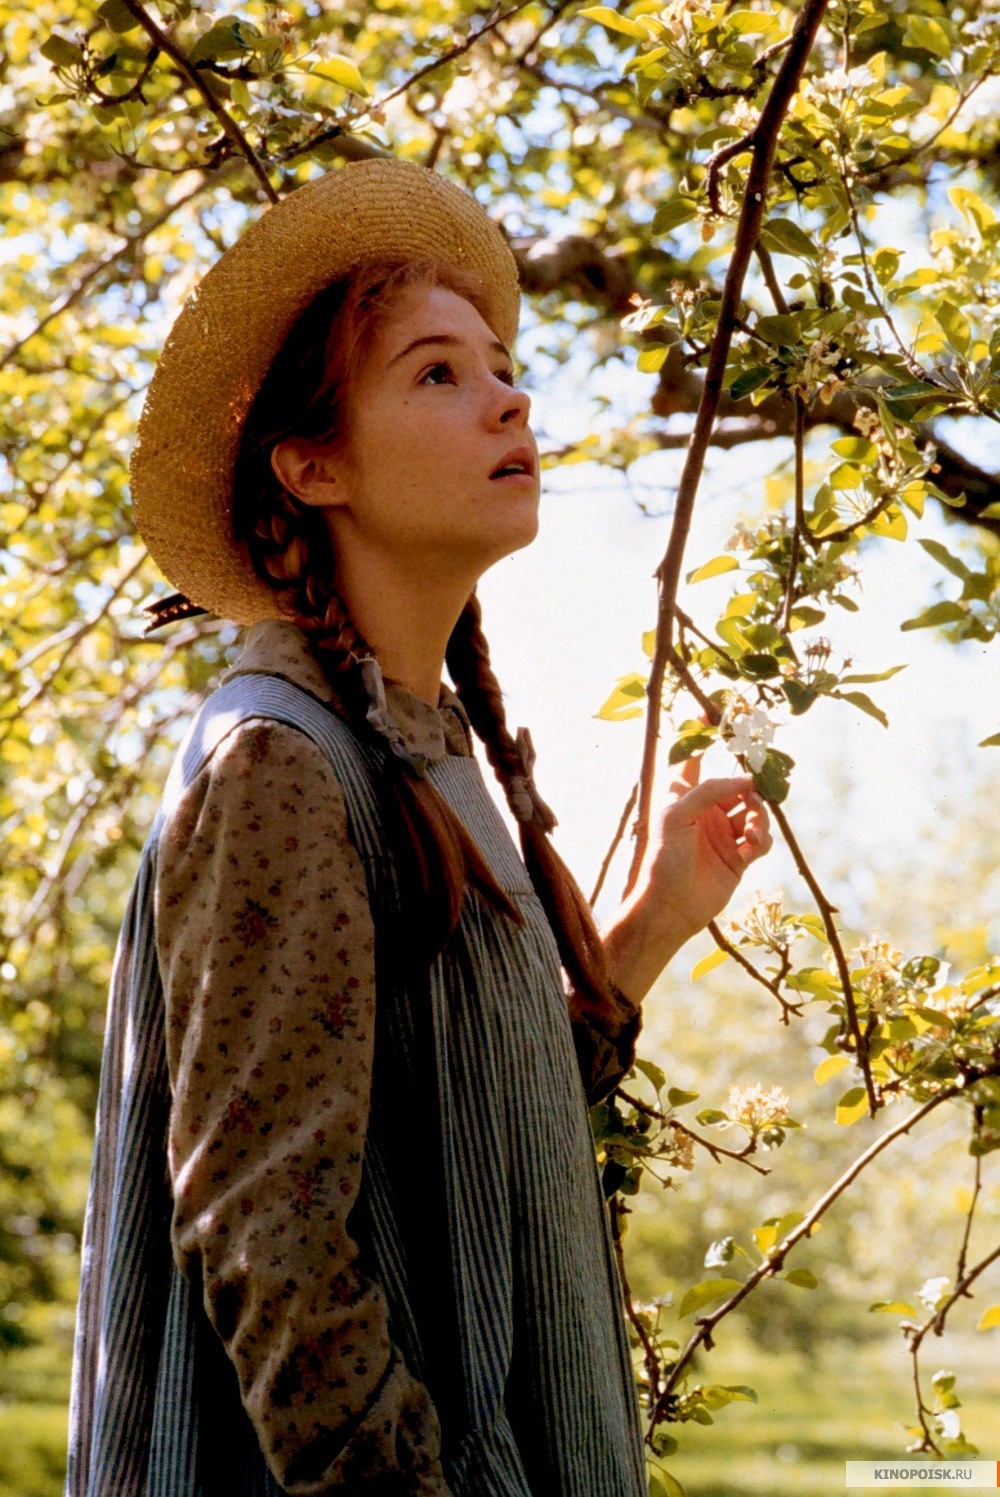 Anne Of Green Gables Movie Quotes. QuotesGram